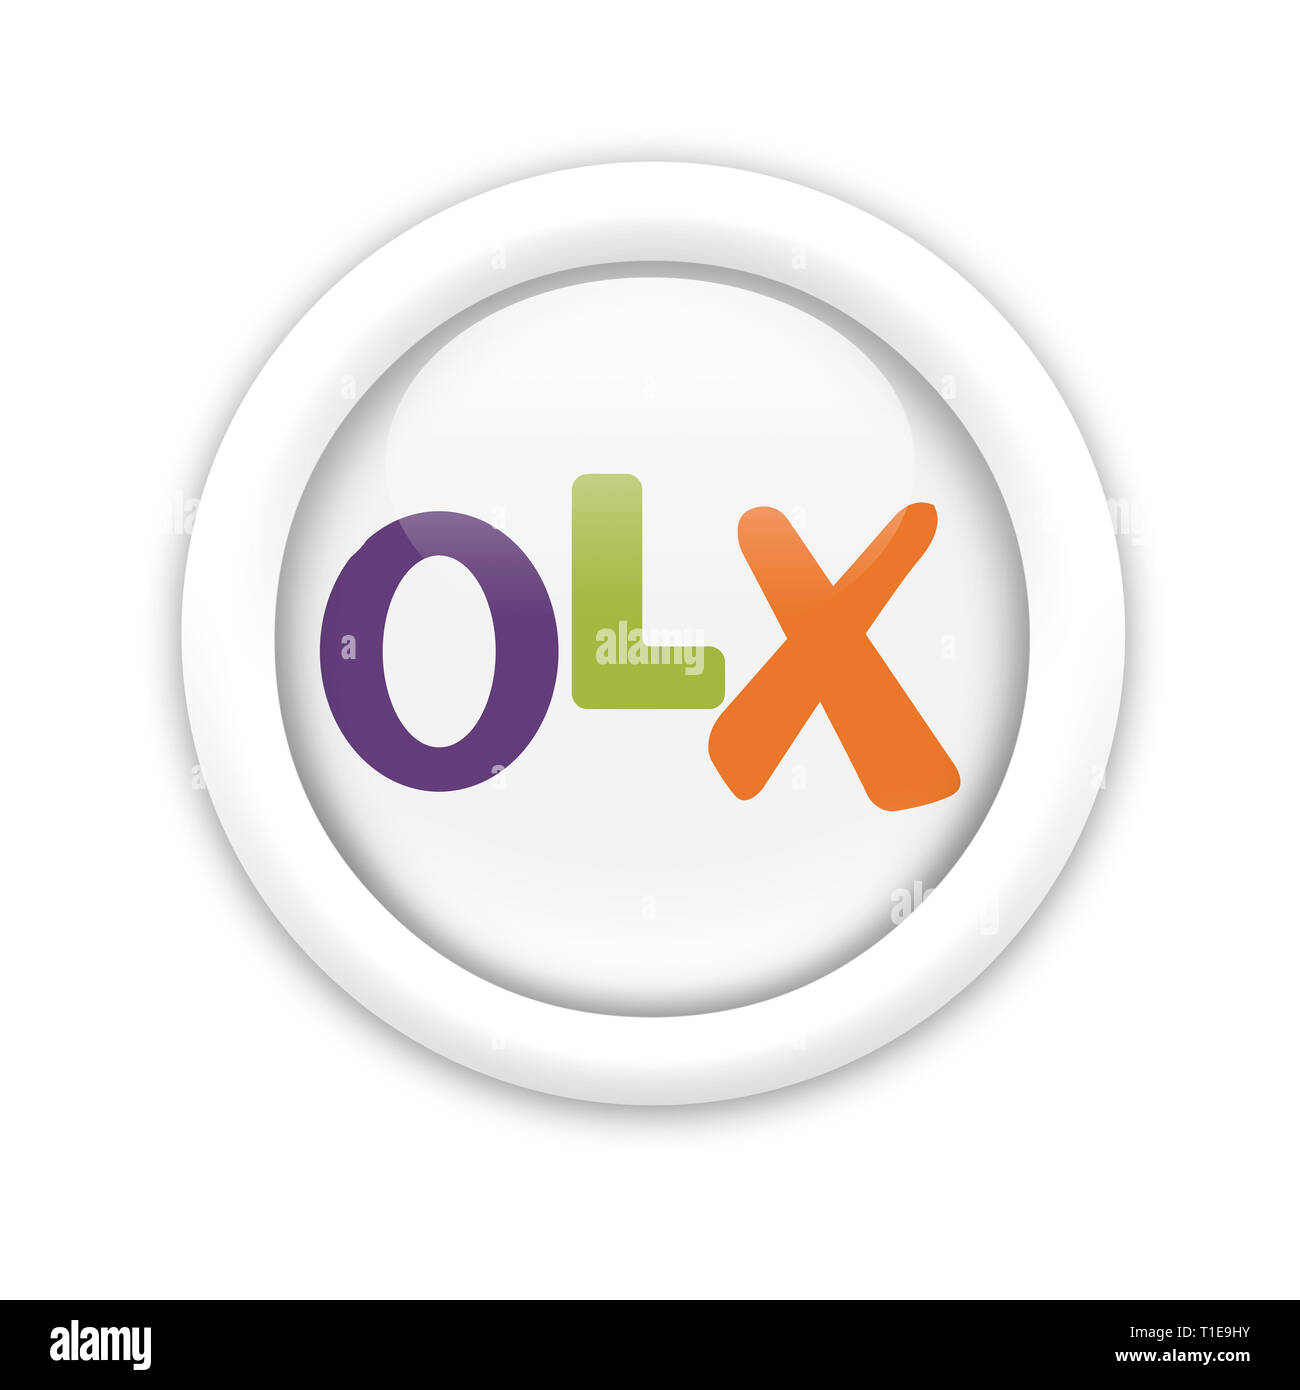 File:Logo olx.png - Wikimedia Commons